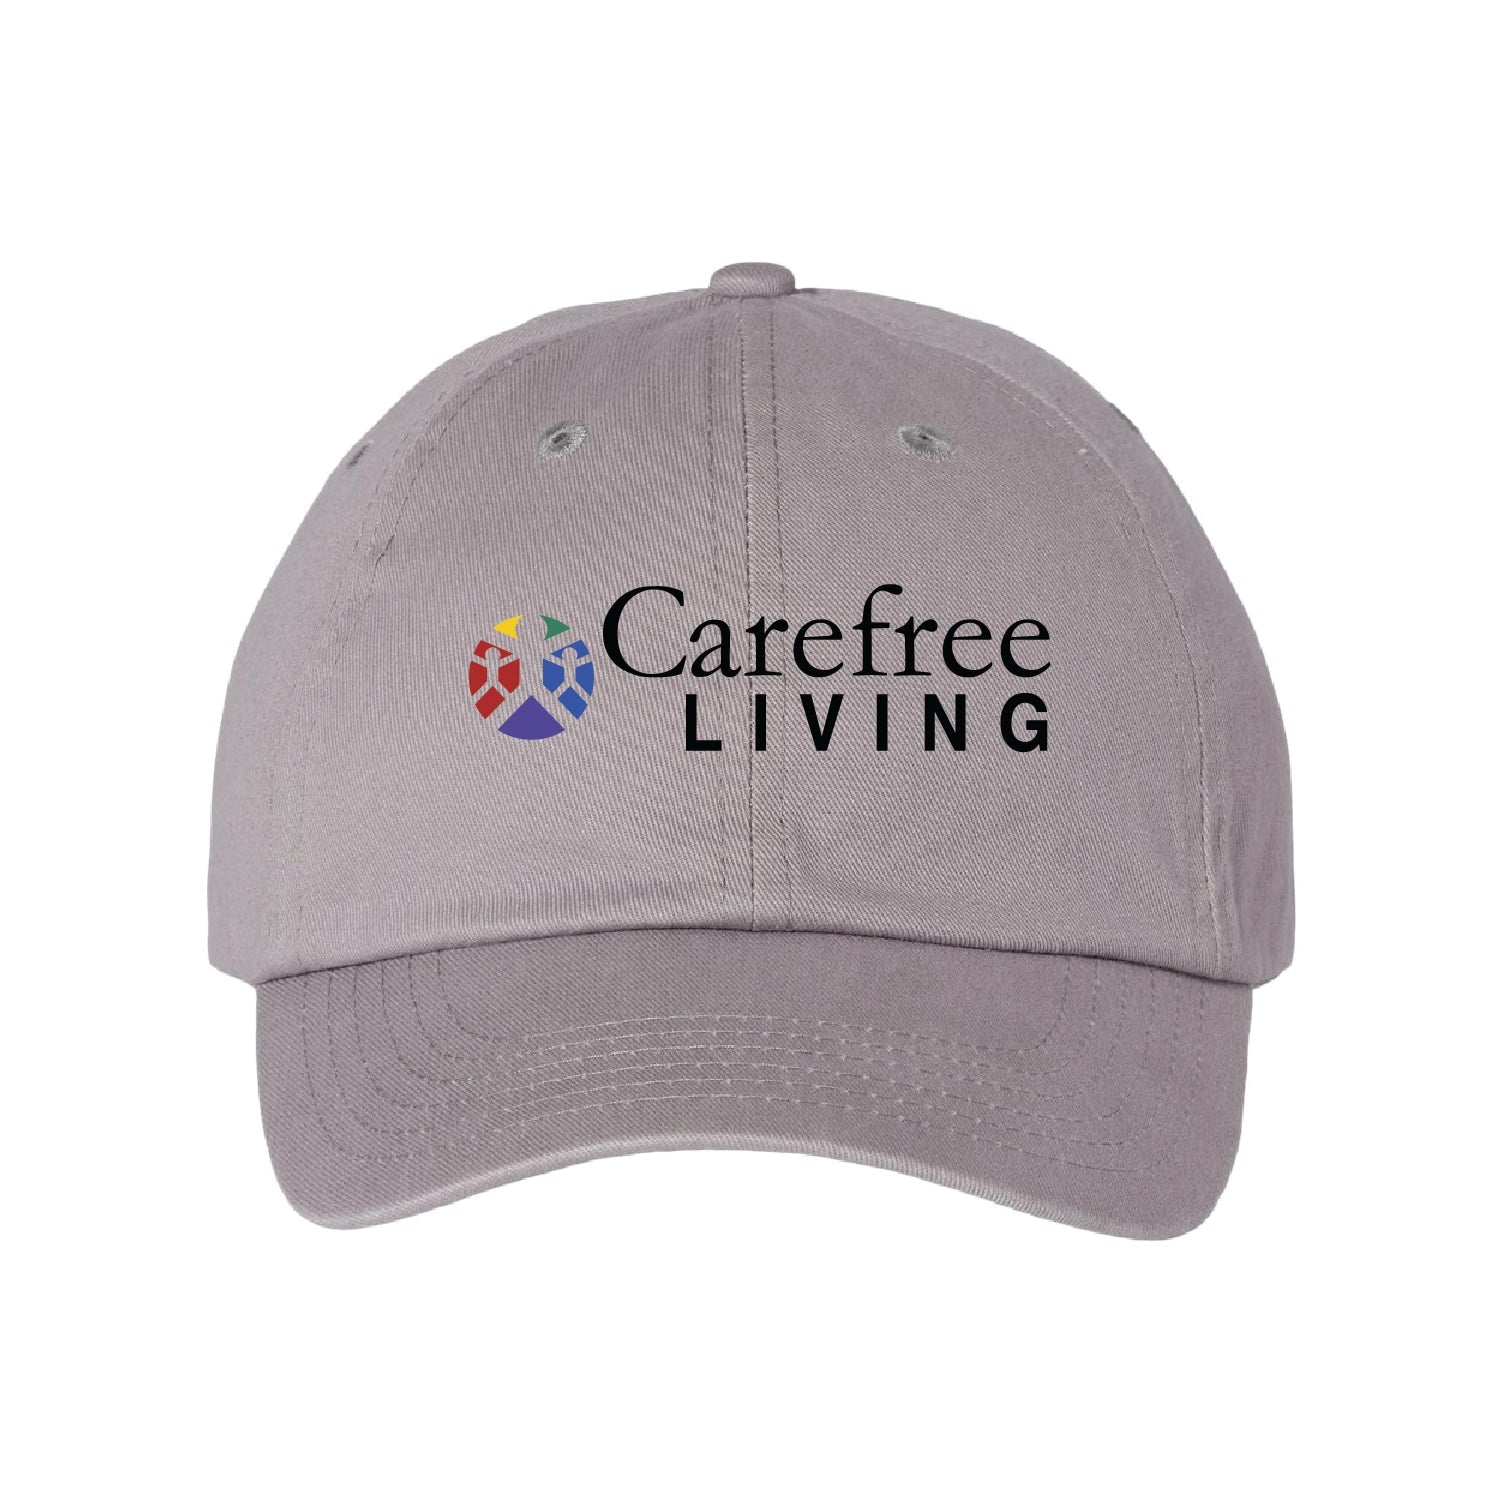 Carefree Living Dad Cap - DSP On Demand